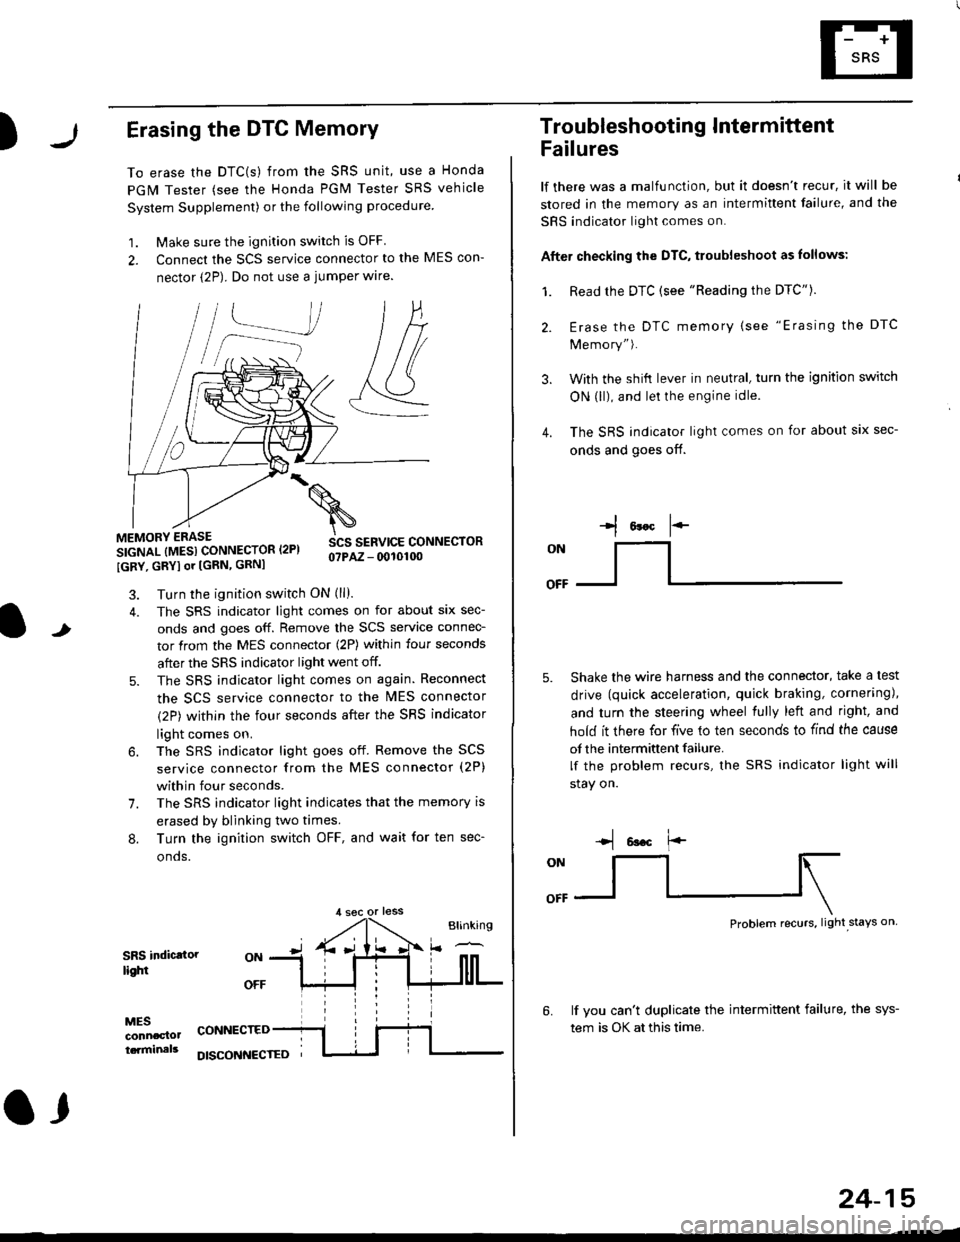 HONDA CIVIC 1996 6.G Workshop Manual )Erasing the DTC Memory
To erase the DTC(s) from the SRS unit, use a Honda
PGM Tester (see the Honda PGM Tester SRS vehicle
System Supplement) or the following procedure
1. Make sure the ignition swit